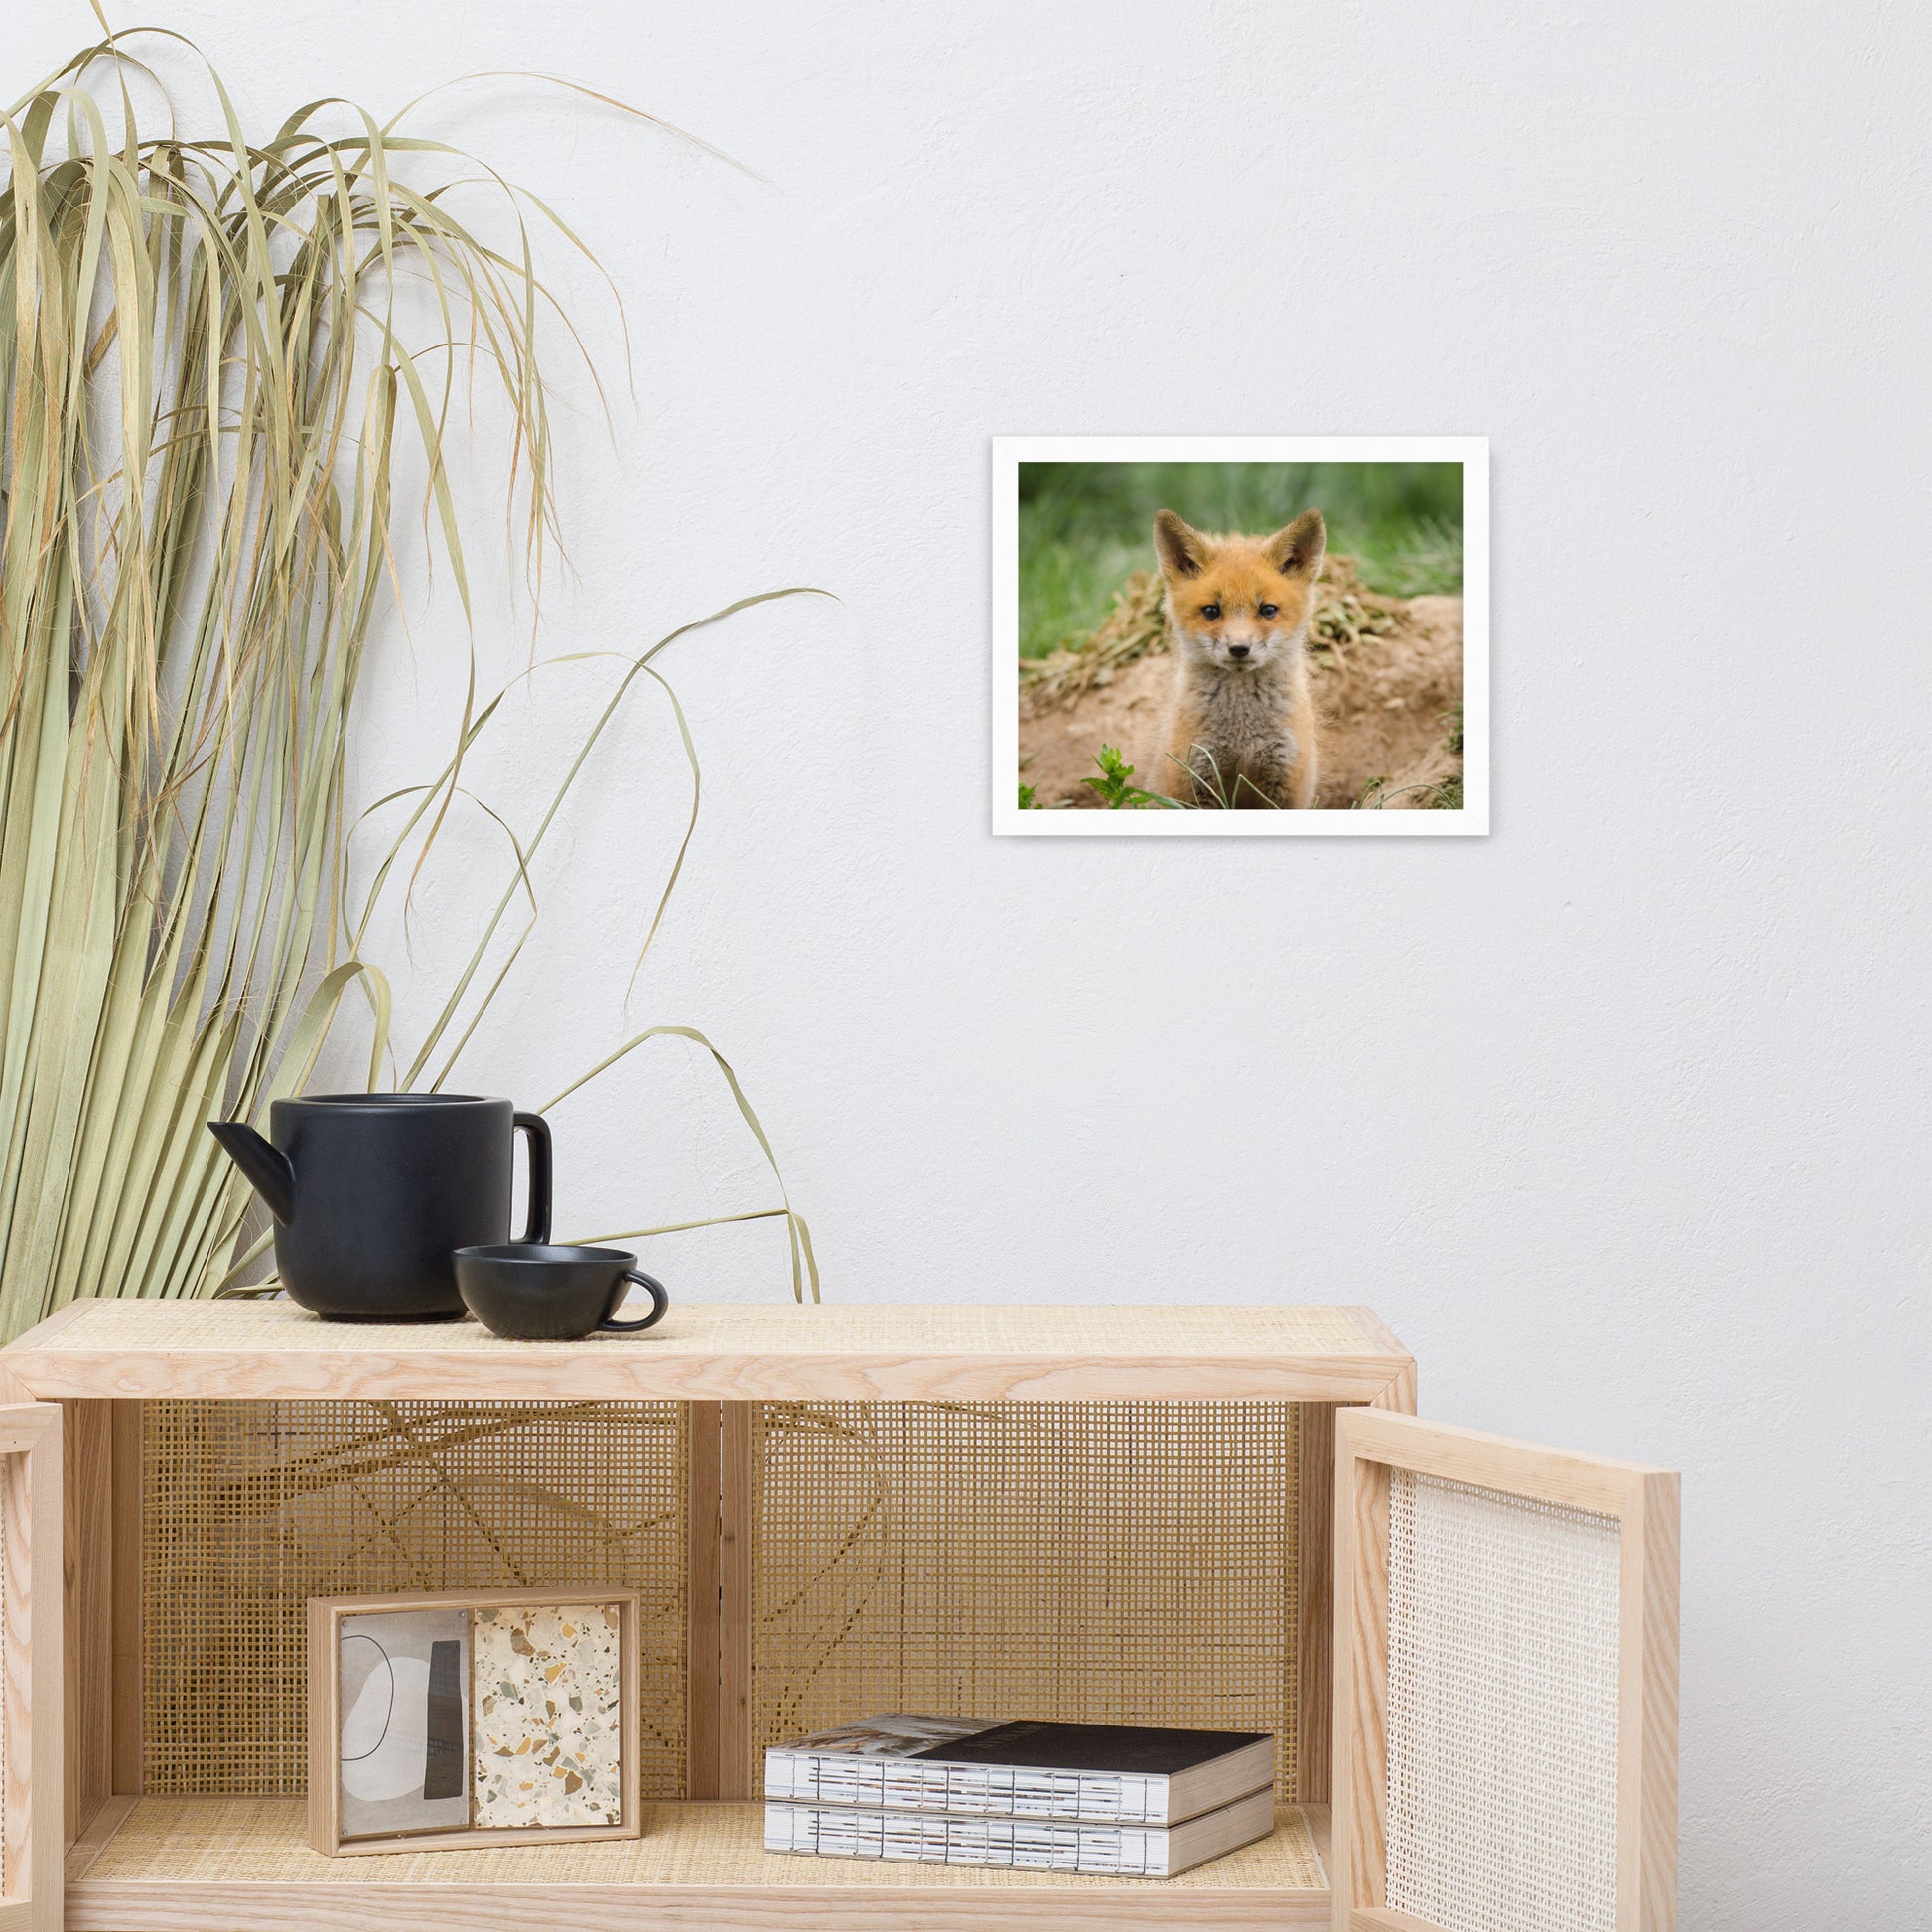 Unique Bathroom Artwork: Baby Young Red Fox Kit/ Animal / Wildlife / Nature Photographic Artwork - Framed Artwork - Wall Decor